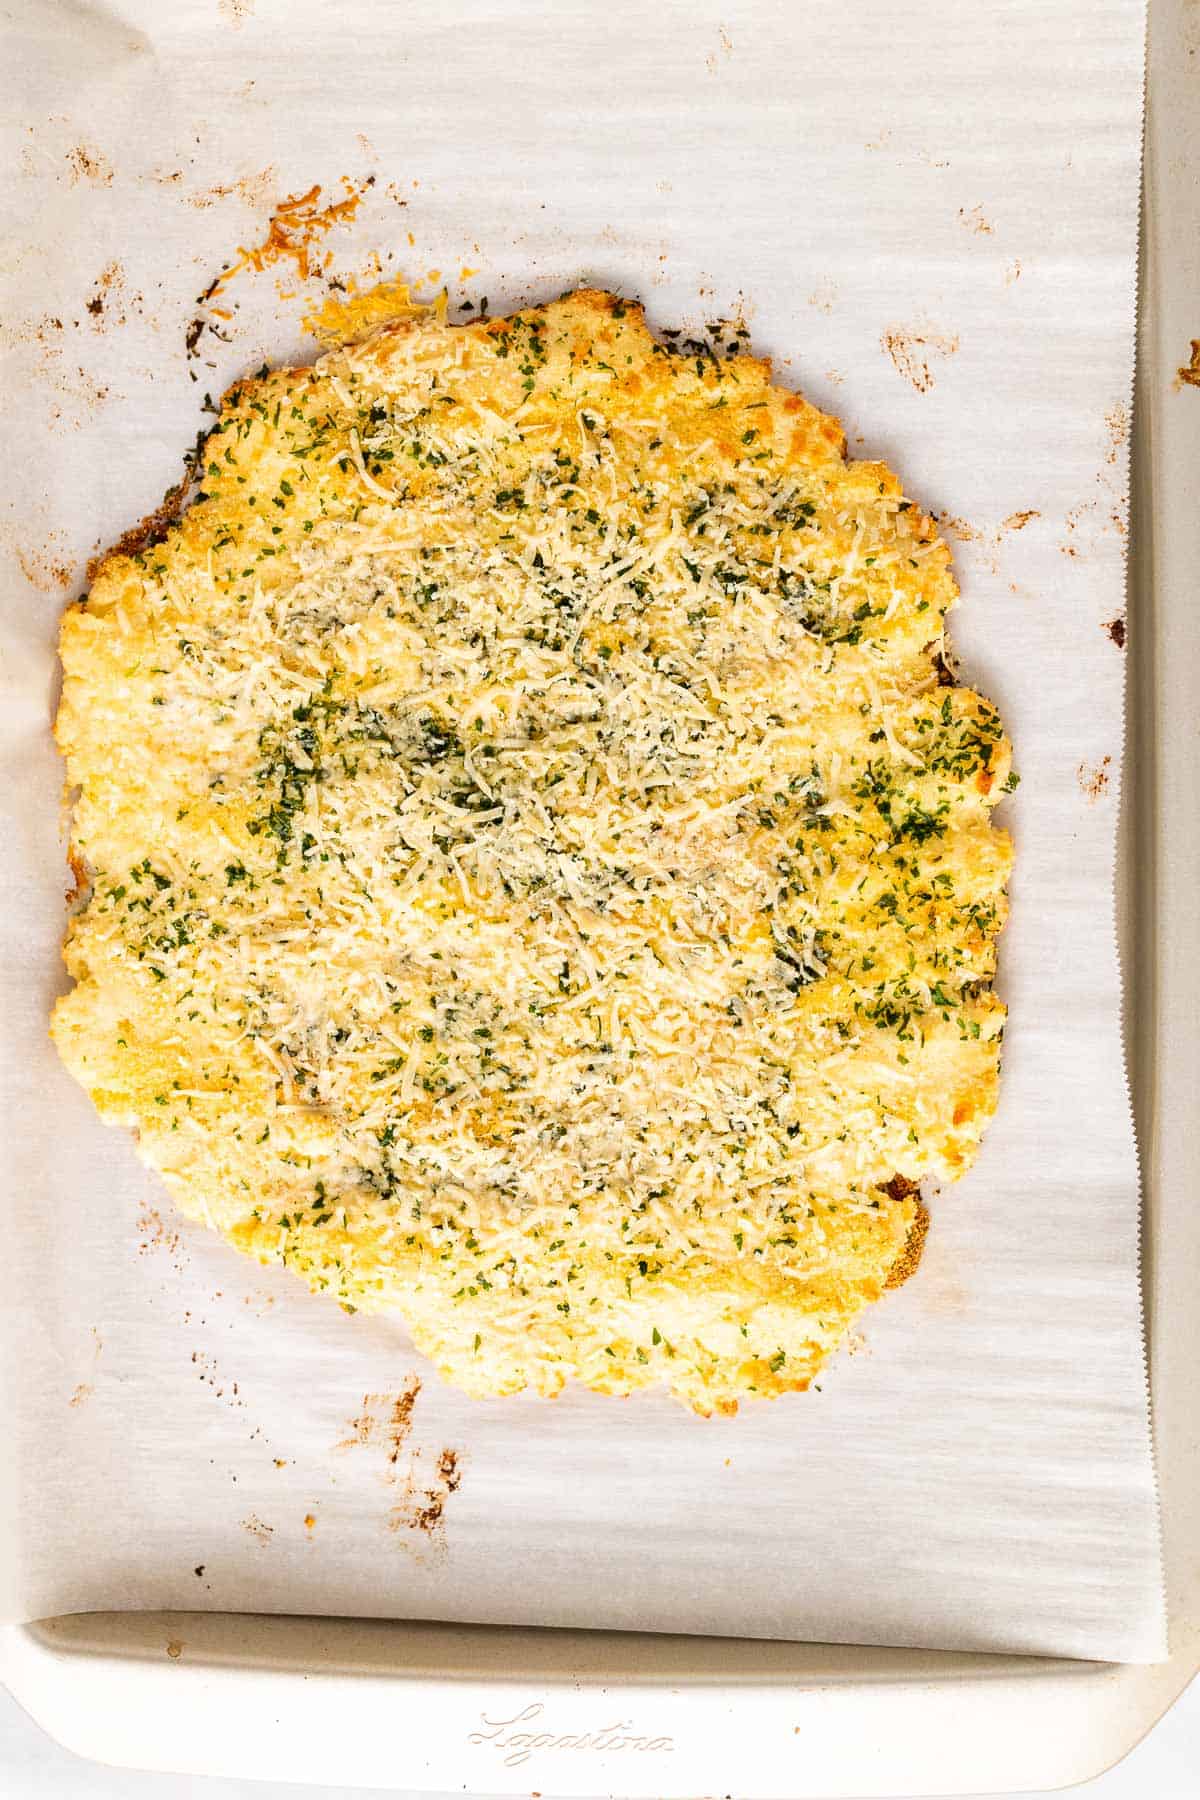 Finished garlic bread sitting on a baking sheet lined with parchment paper, as seen from above